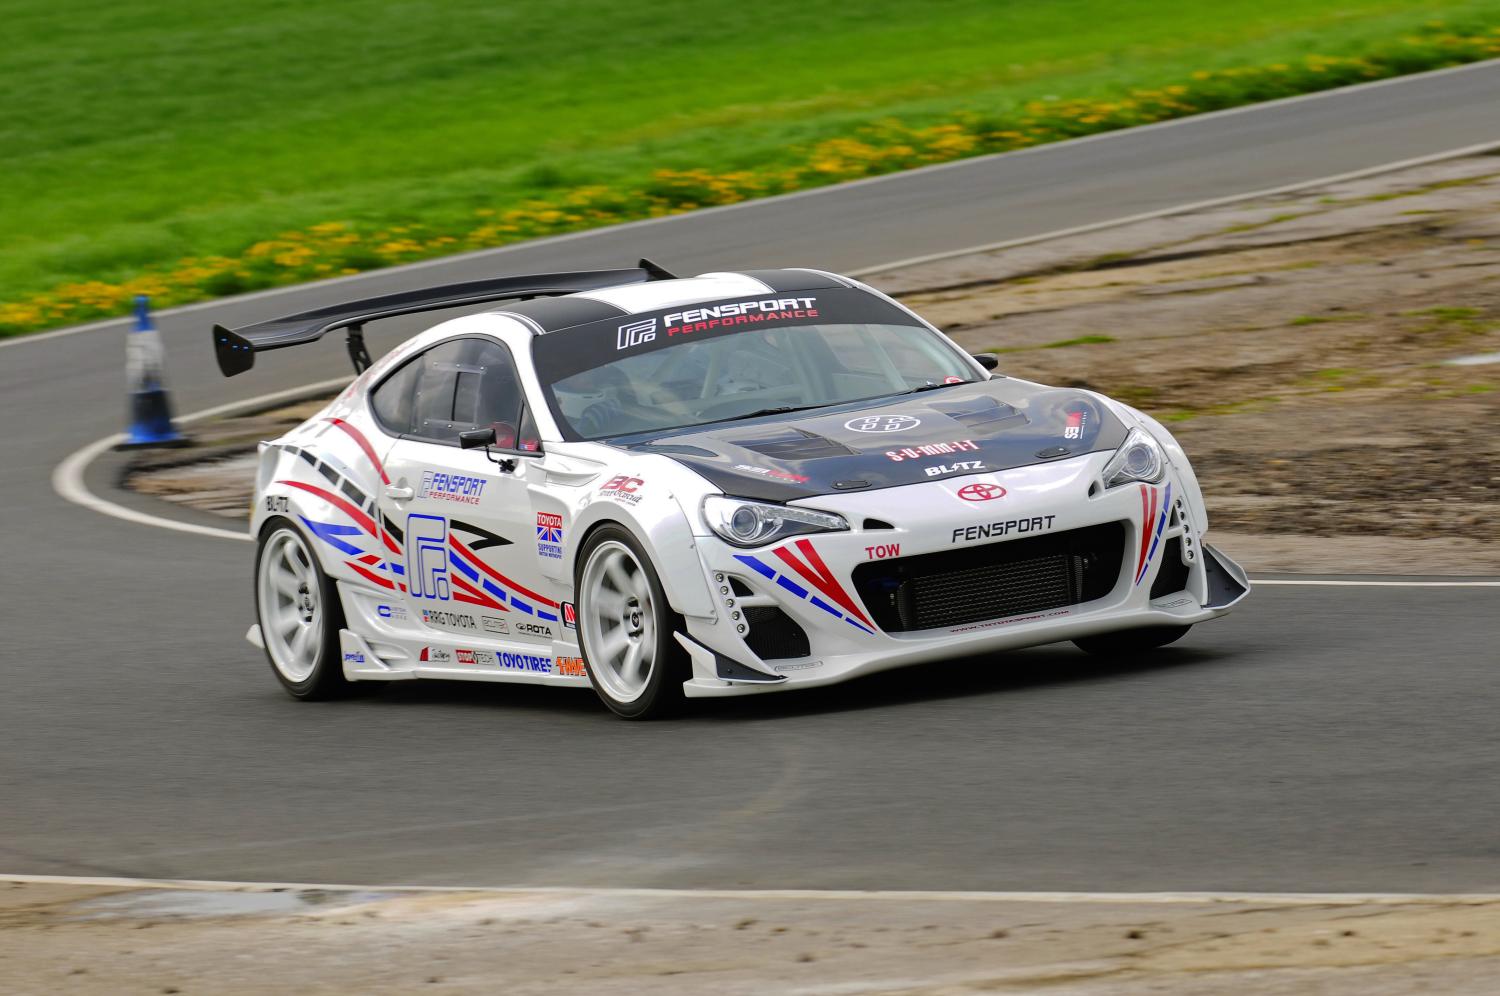 Seibon Carbon/ Fensport GT86R: 1st Overall in Toyota Sprint Series after Round 2